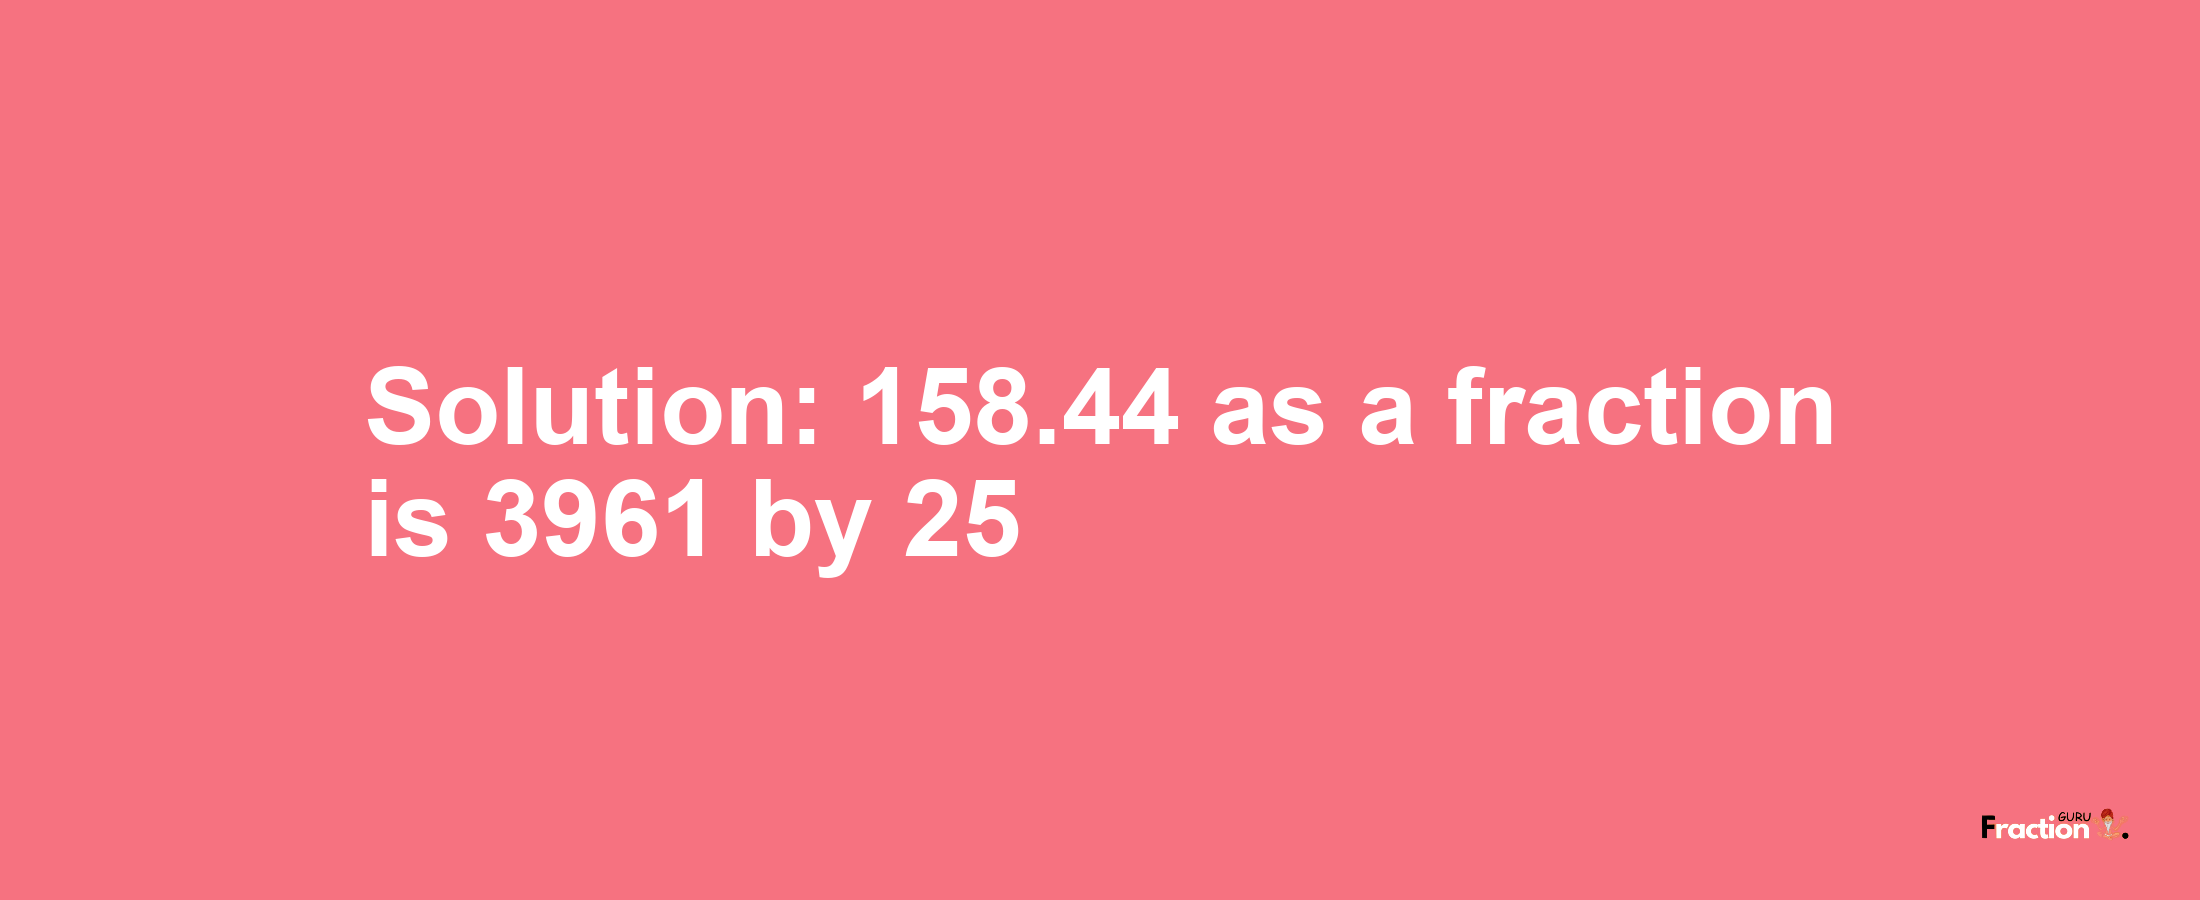 Solution:158.44 as a fraction is 3961/25